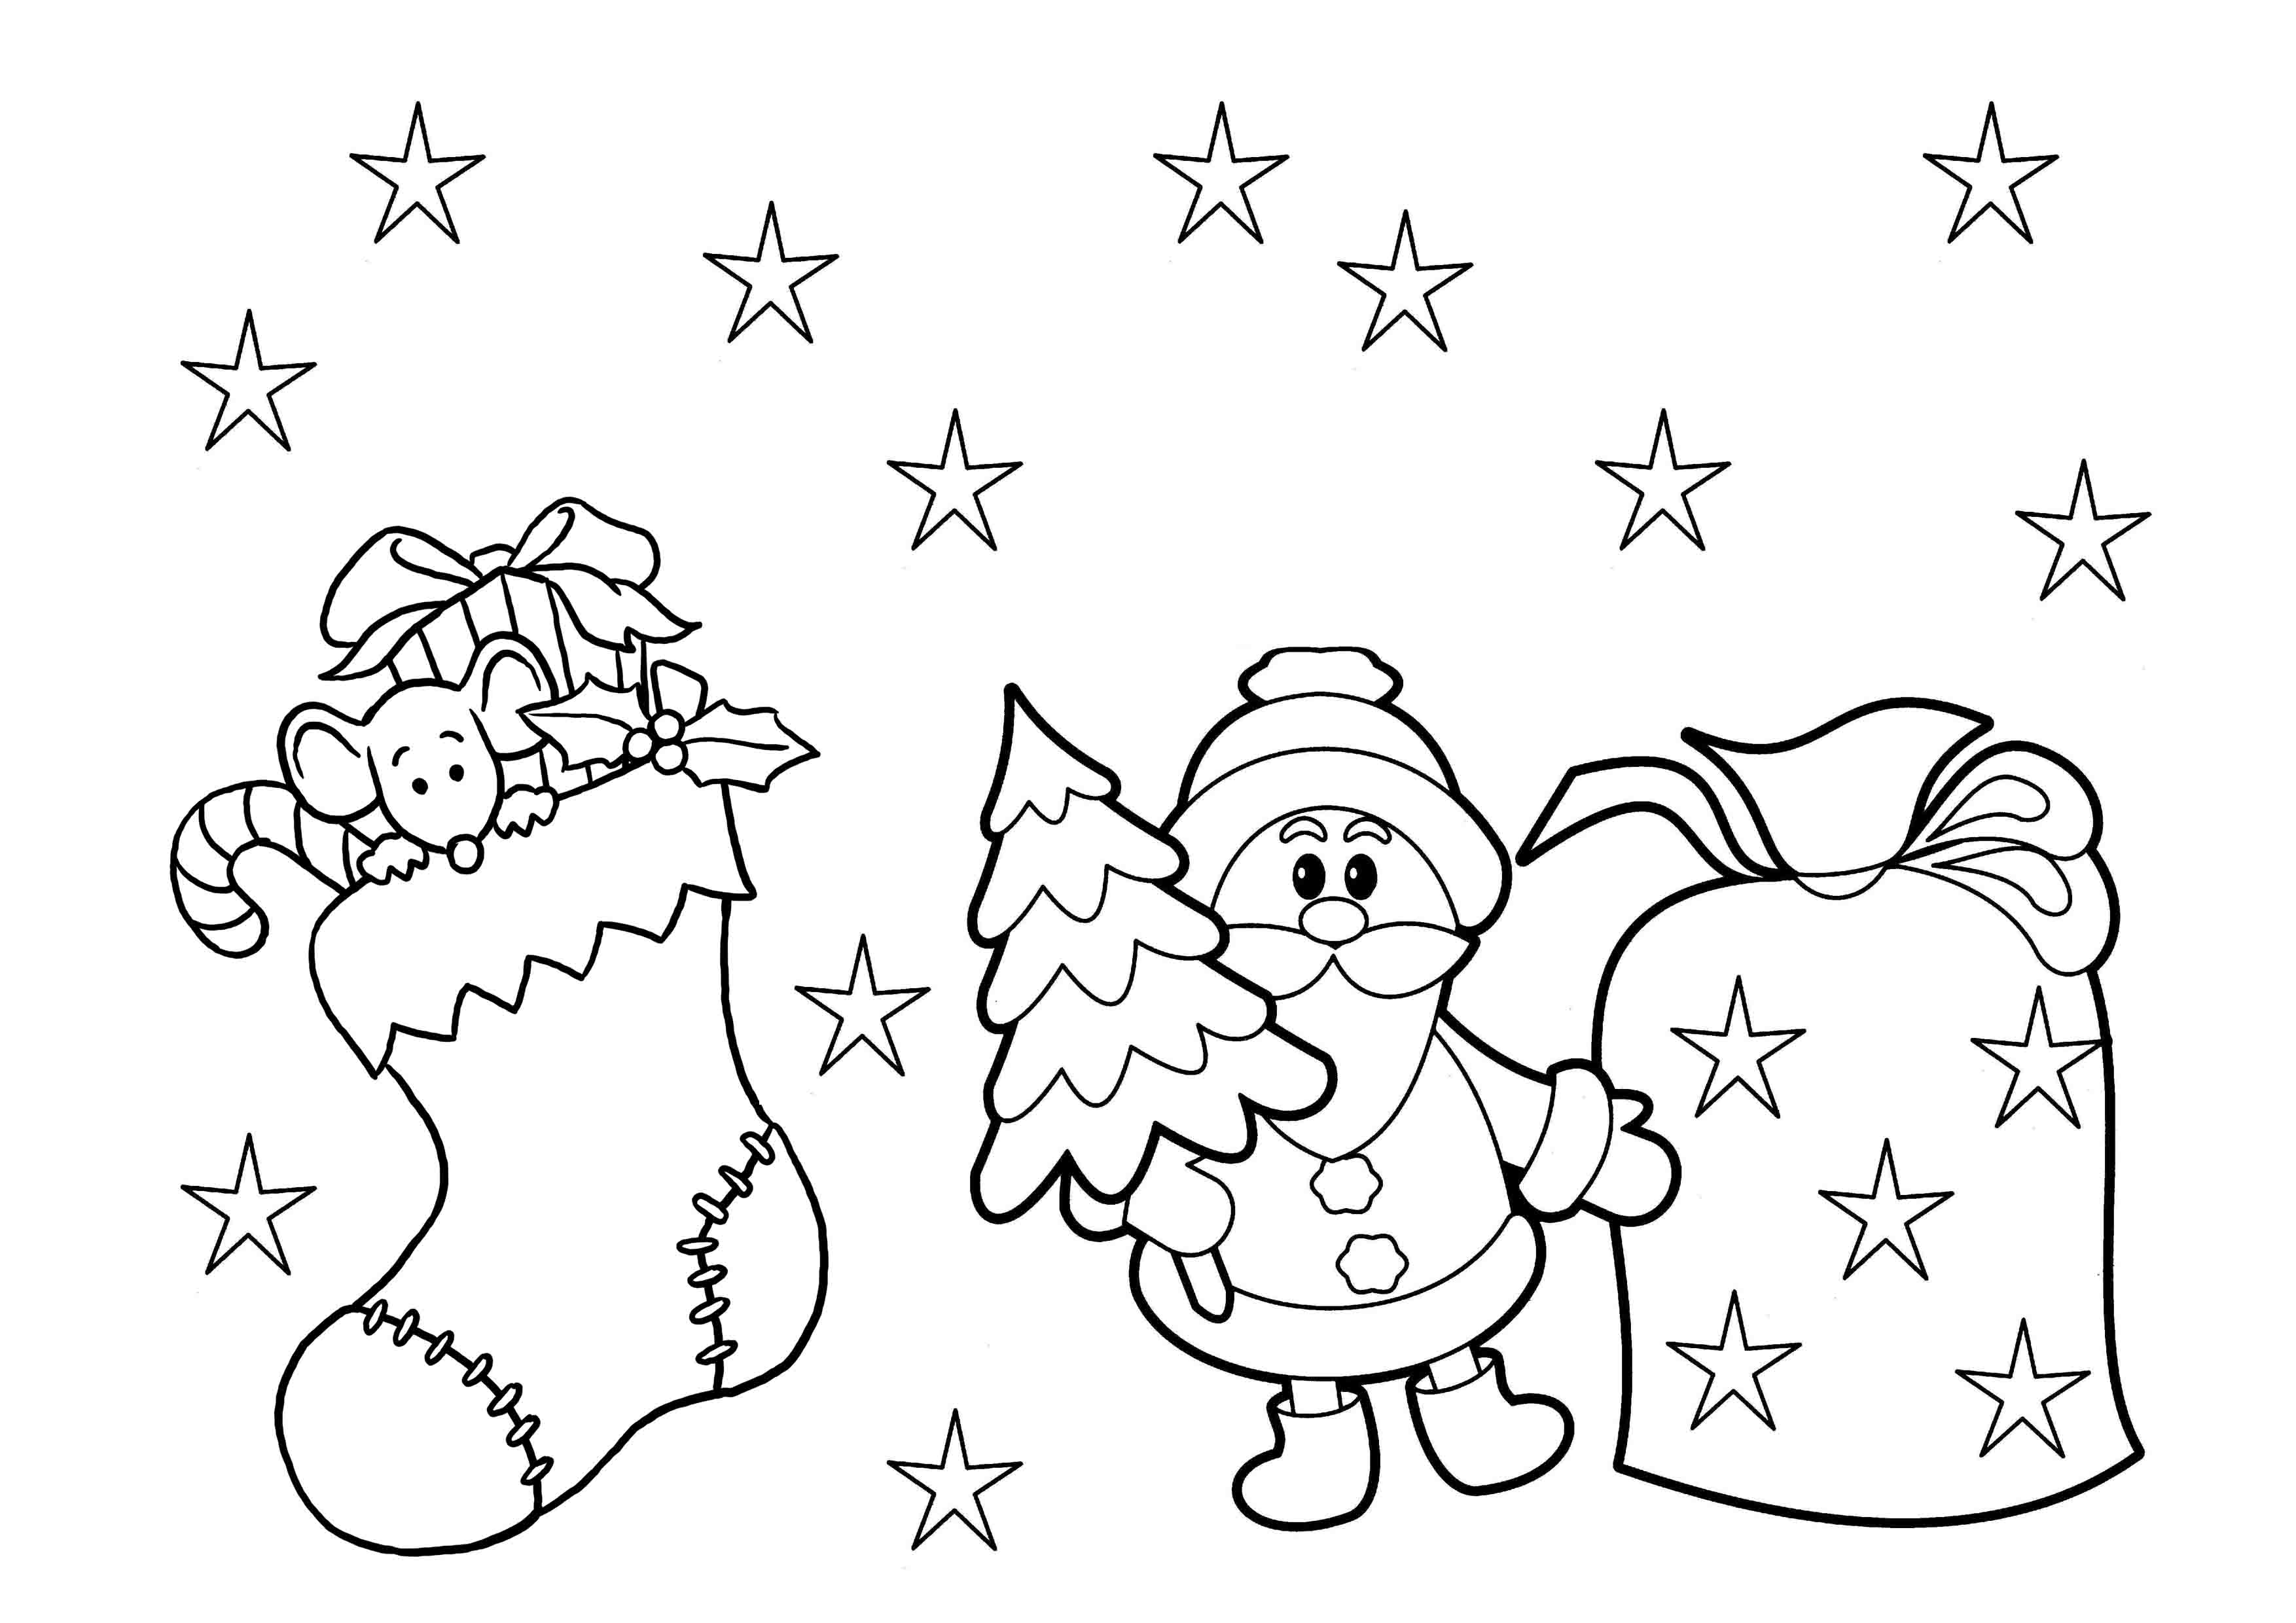 Coloring Pages : Christmas Coloring Sheets For Preschool Pages Print - Free Printable Color Sheets For Preschool